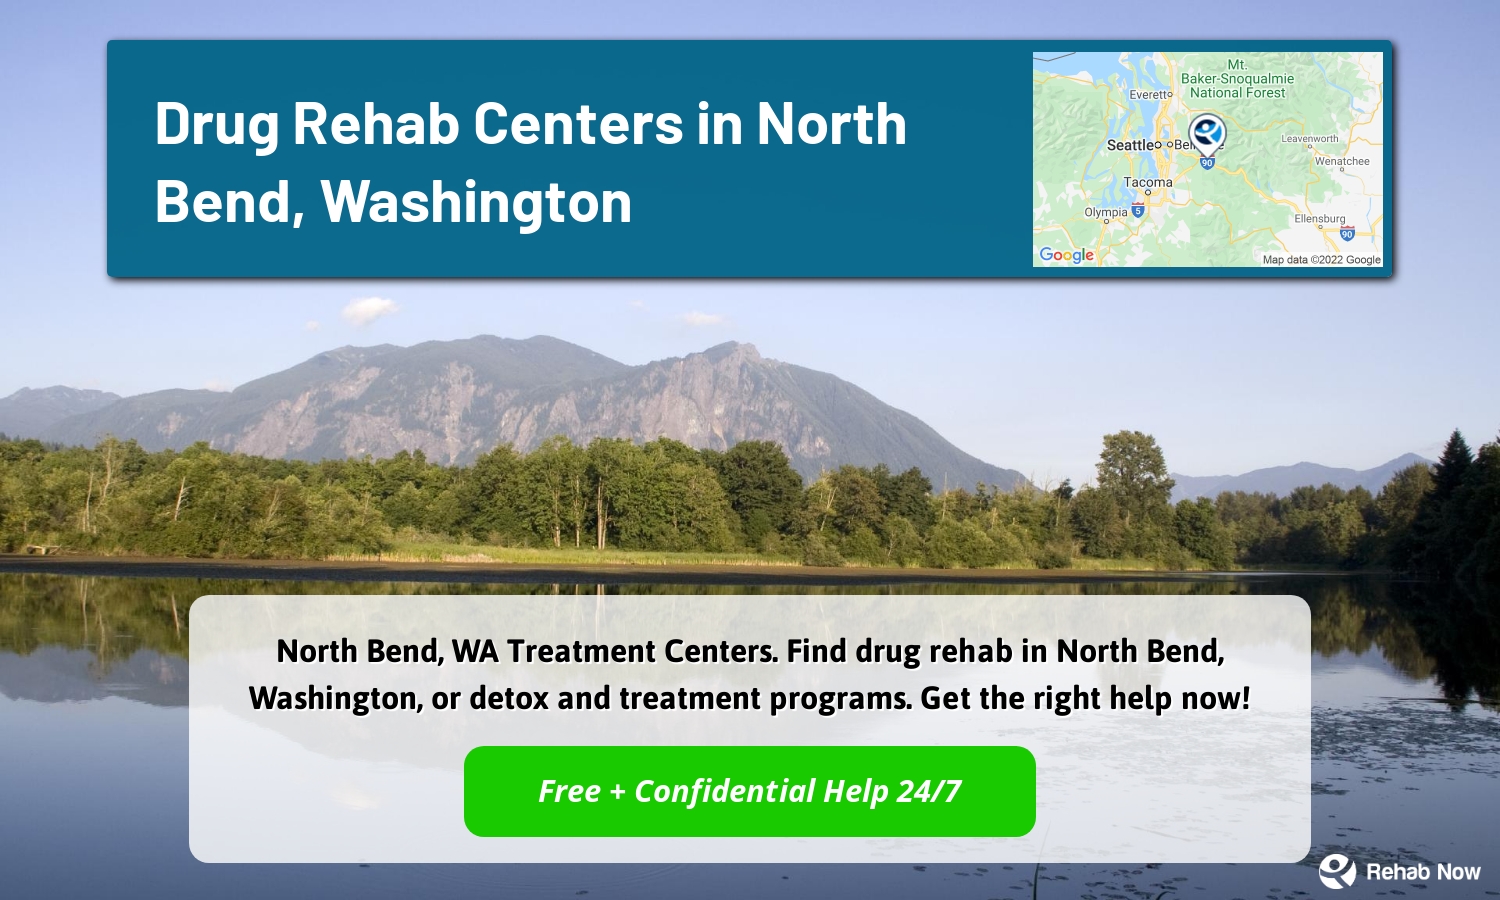 North Bend, WA Treatment Centers. Find drug rehab in North Bend, Washington, or detox and treatment programs. Get the right help now!